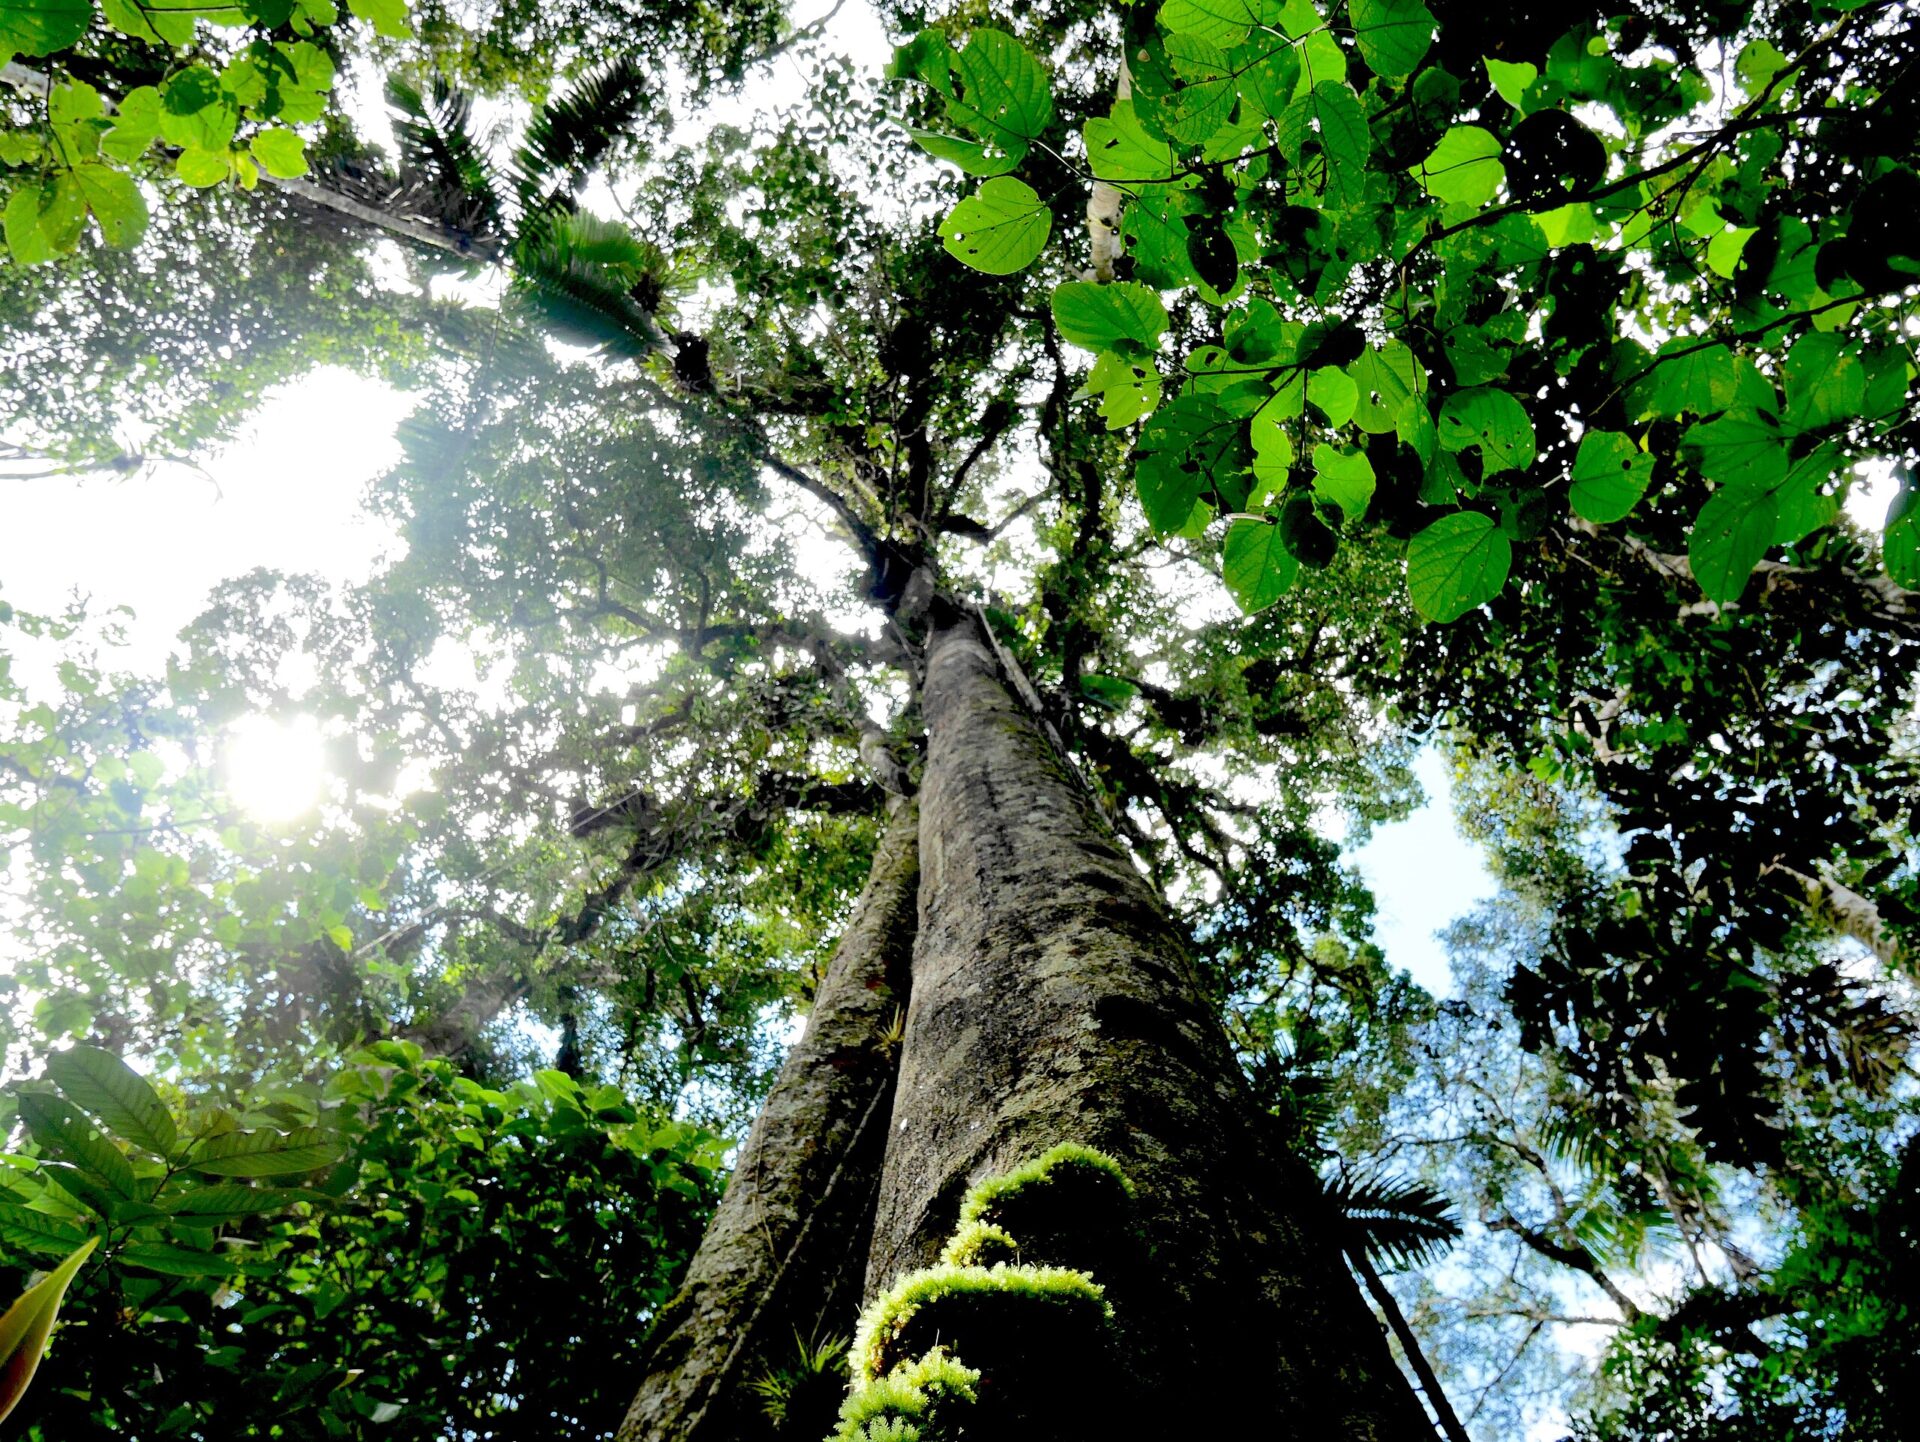 A look up a tree trunk in the Amazon rainforest.